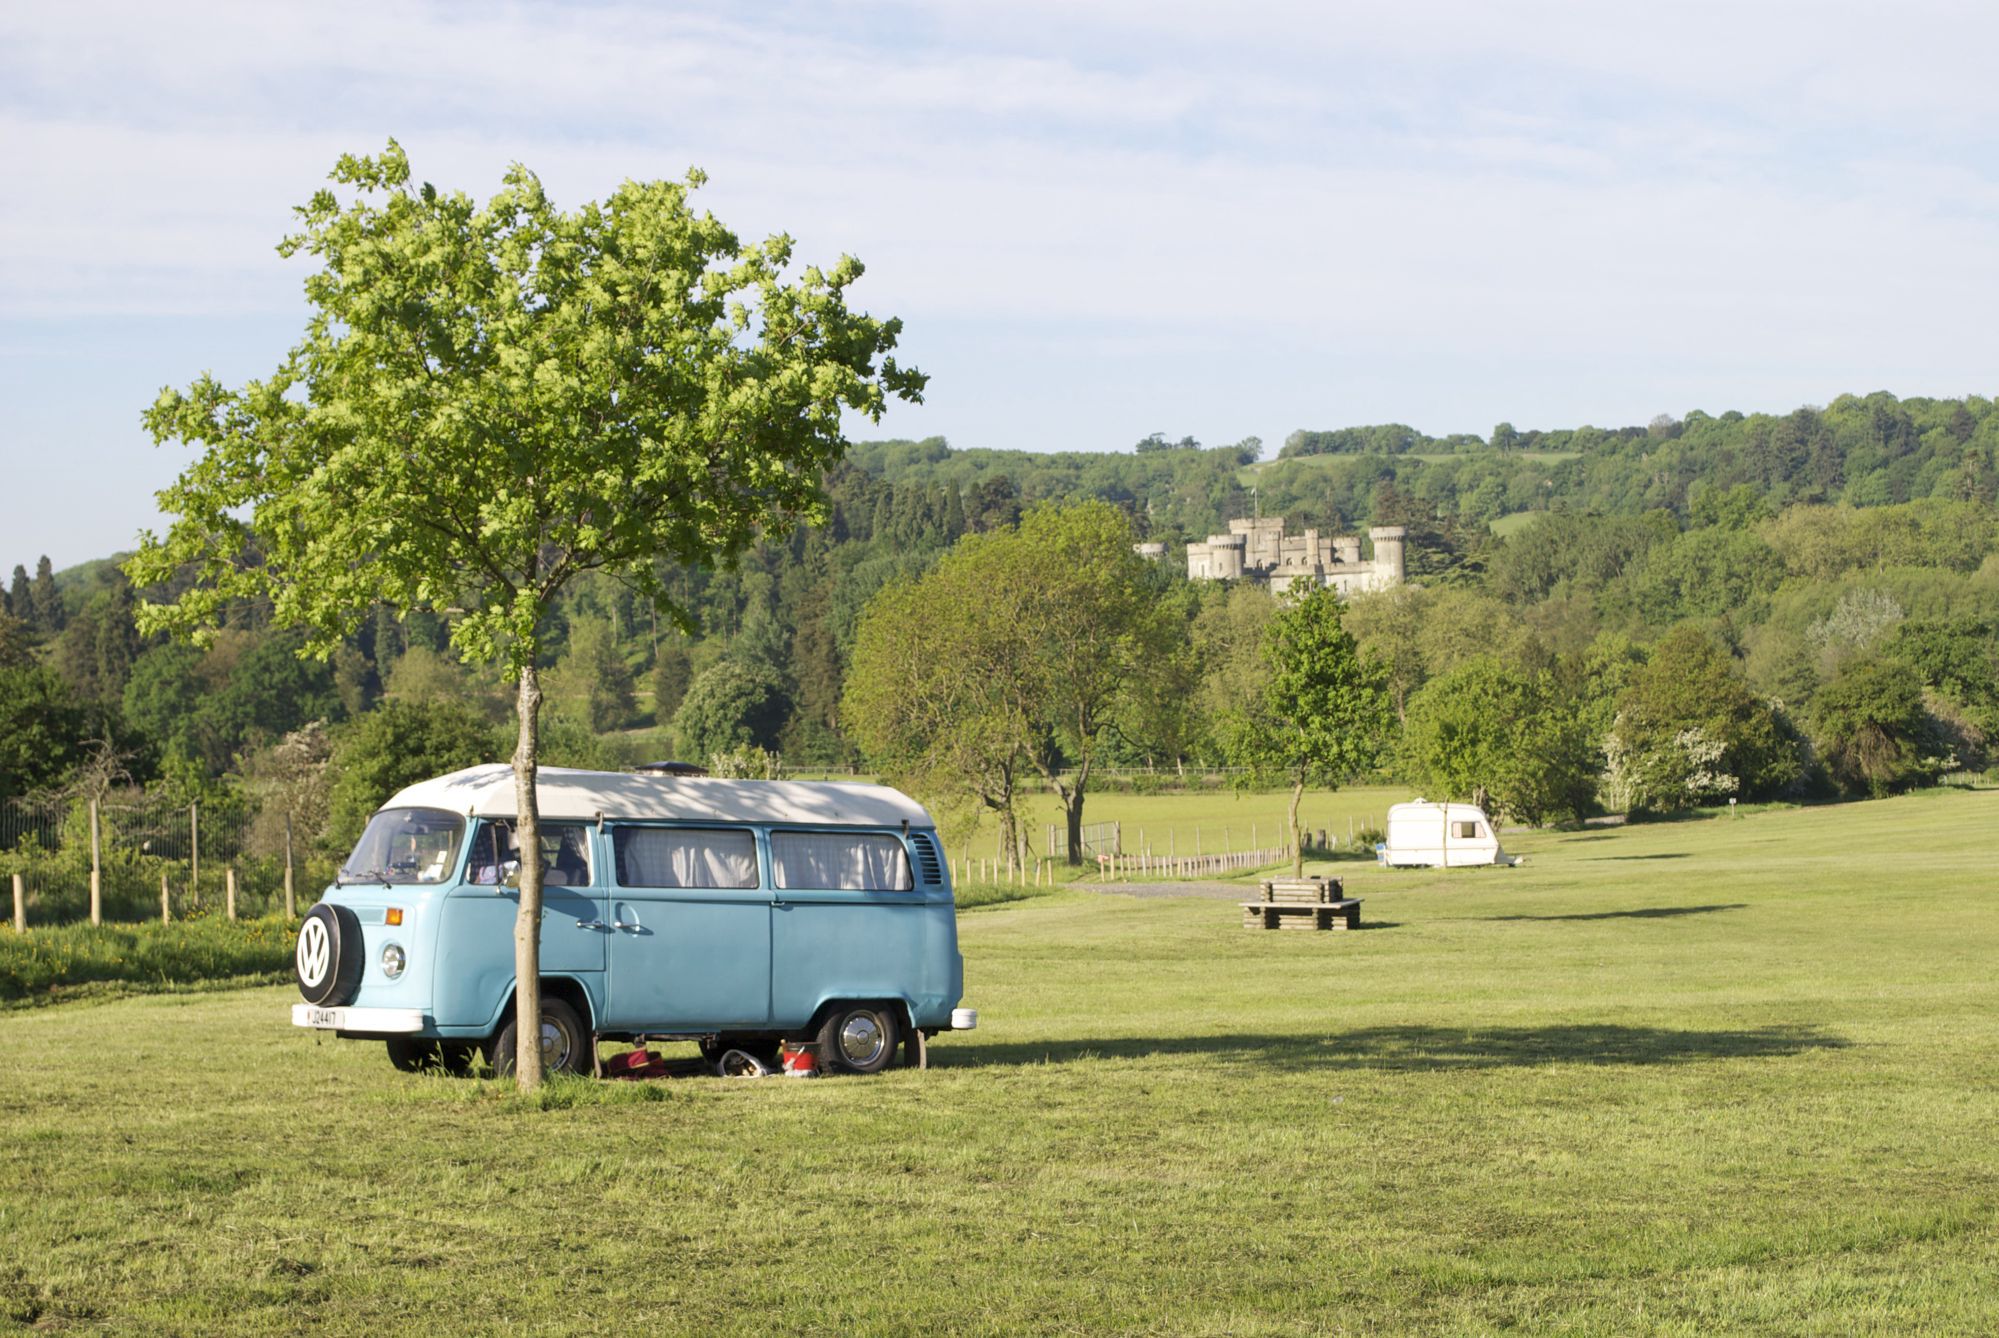 Campsites in the Malvern Hills Area of Outstanding Natural Beauty